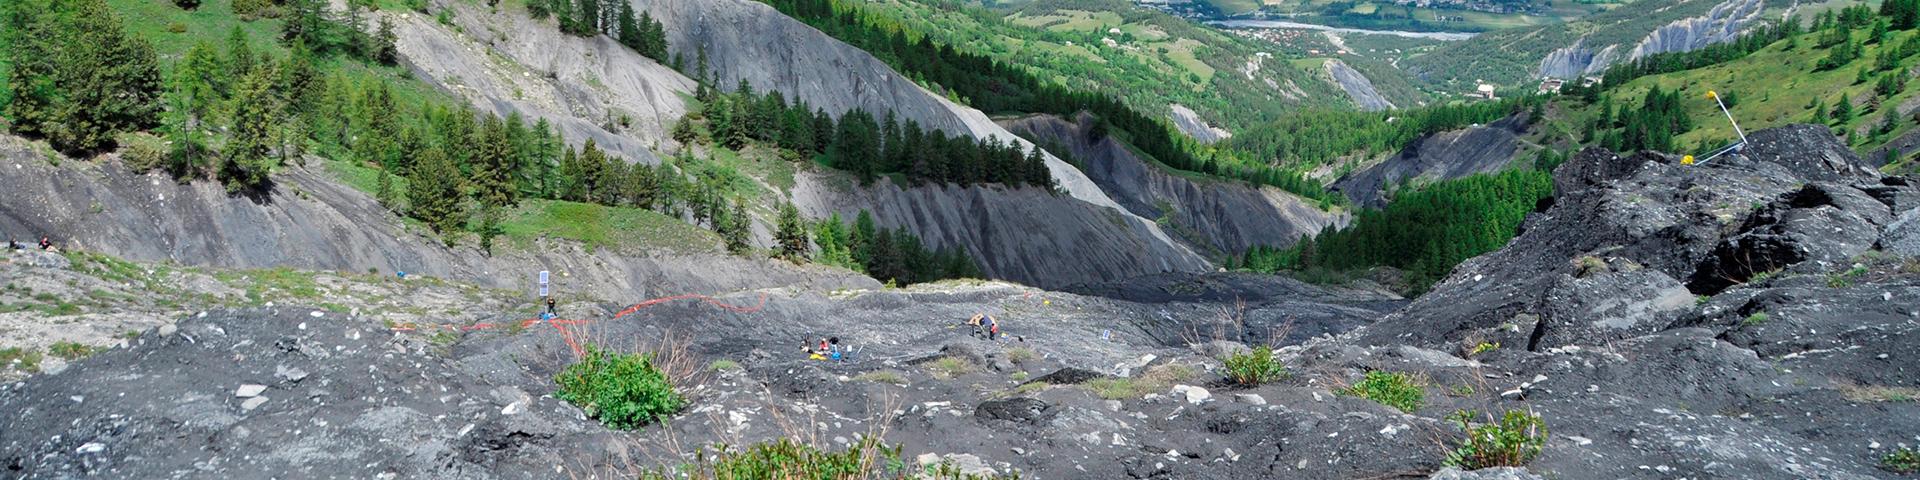 View from the top of the Super-Sauze landslide, Enchastrayes